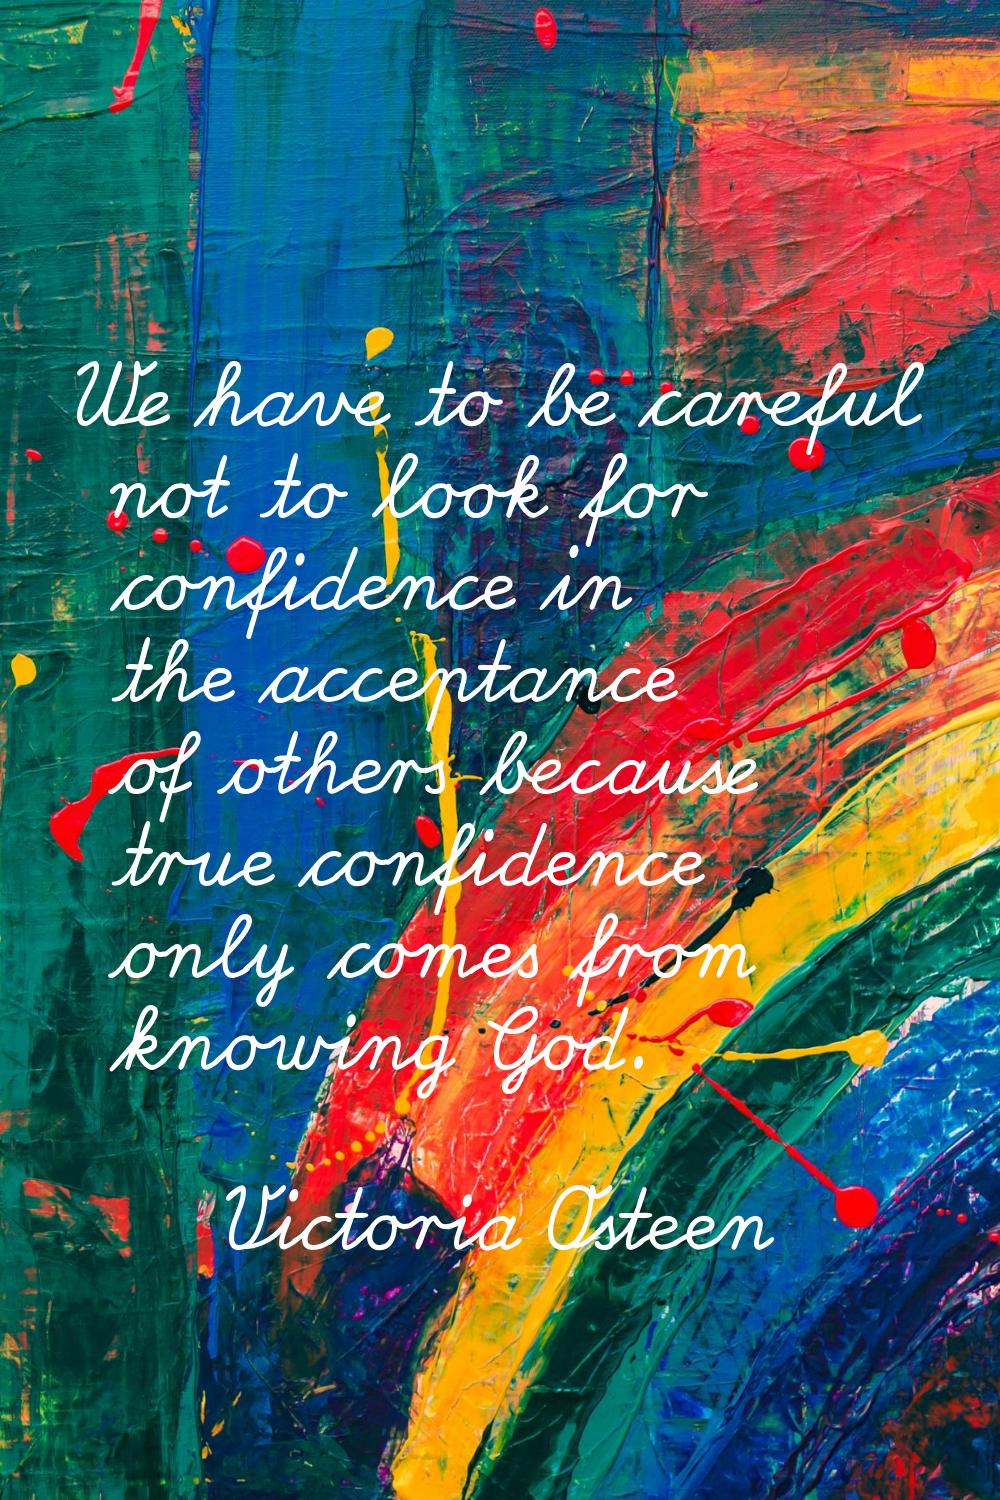 We have to be careful not to look for confidence in the acceptance of others because true confidenc